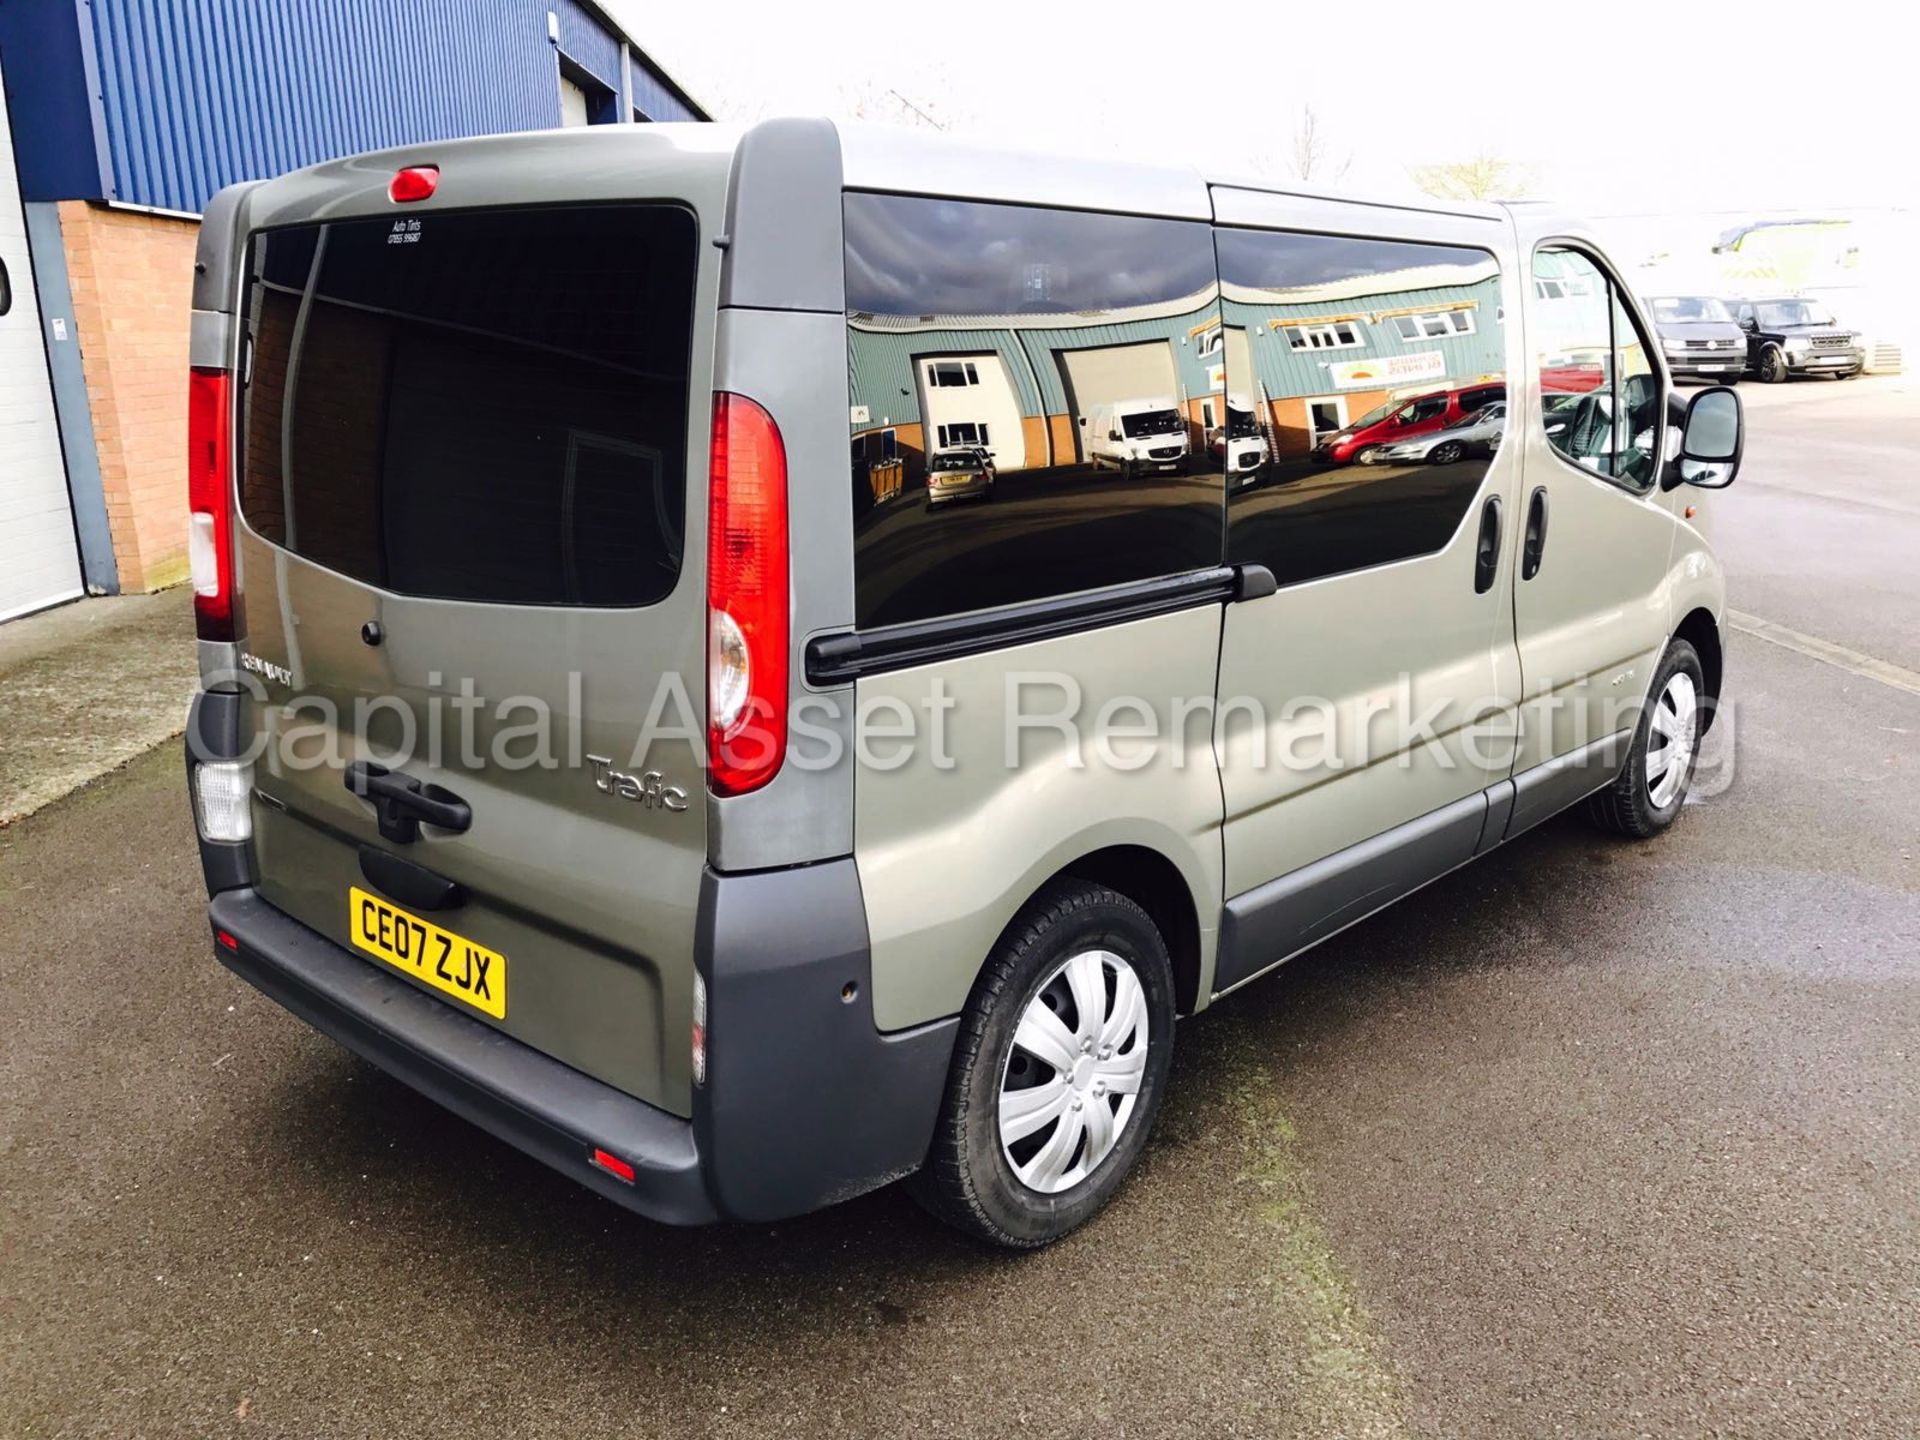 RENAULT TRAFIC SL29 '9 SEATER BUS' (2007) '1.9 DCI - 115 PS - 6 SPEED - A/C' (NO VAT - SAVE 20%) - Image 6 of 15